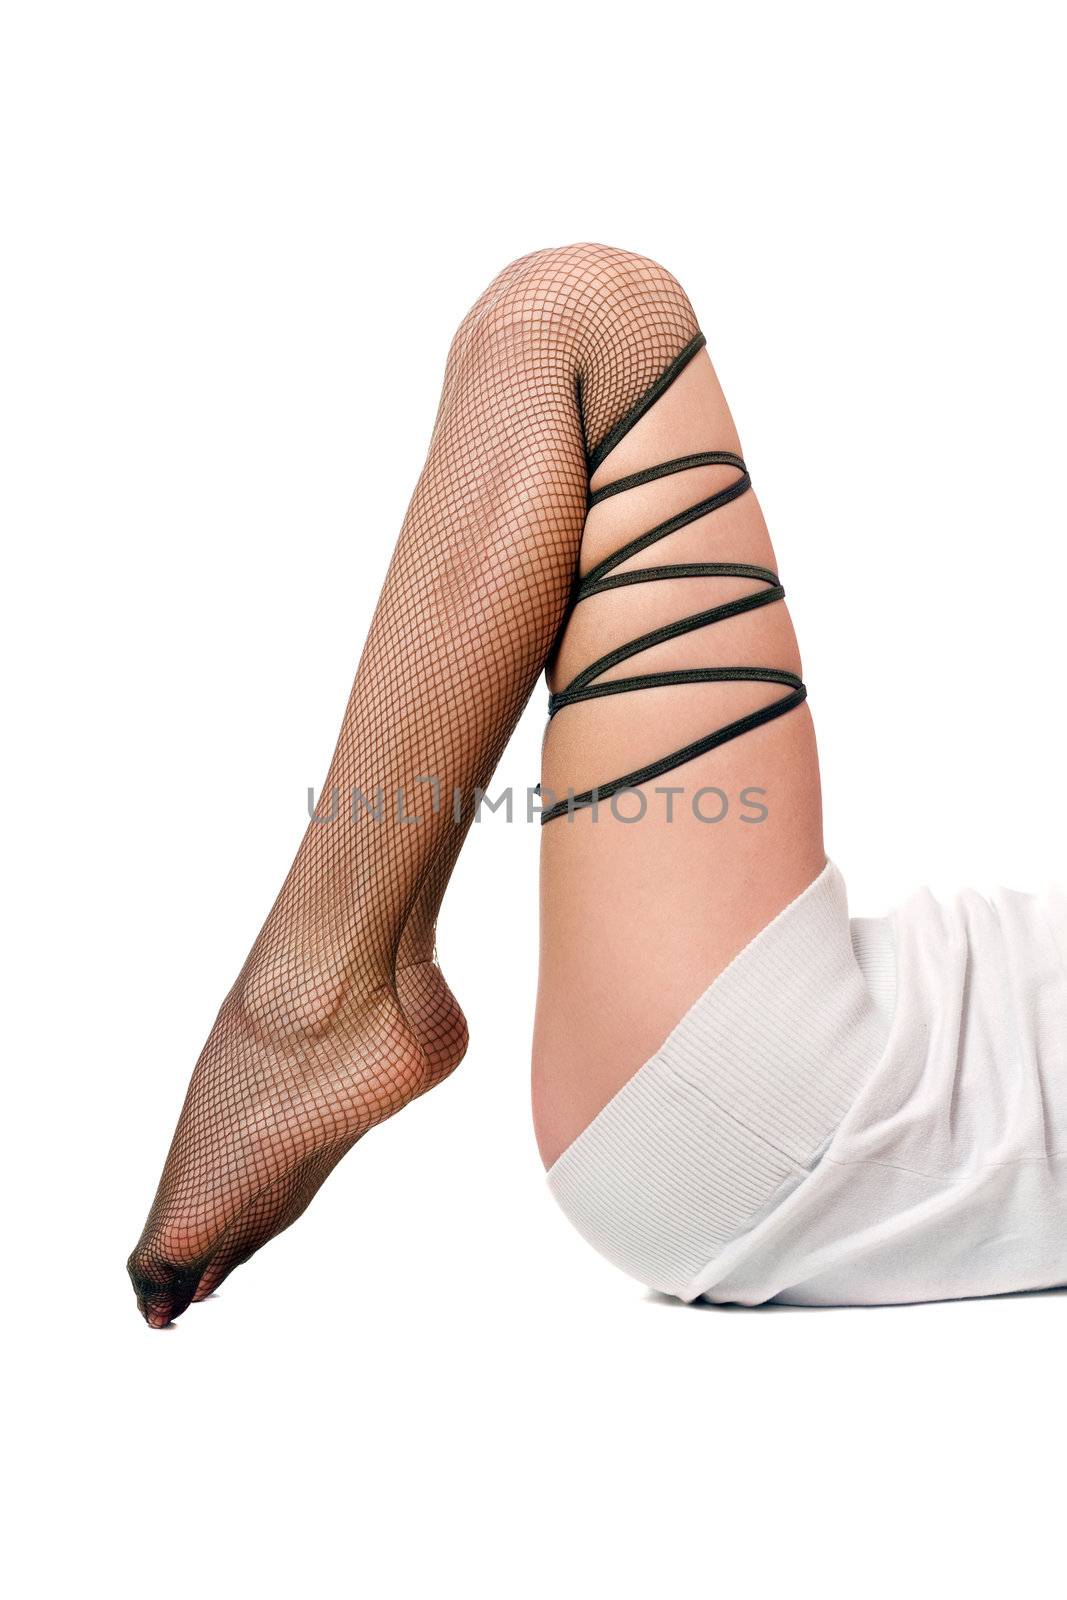 Sexy shapely women's legs in pantyhose. Isolated by acidgrey